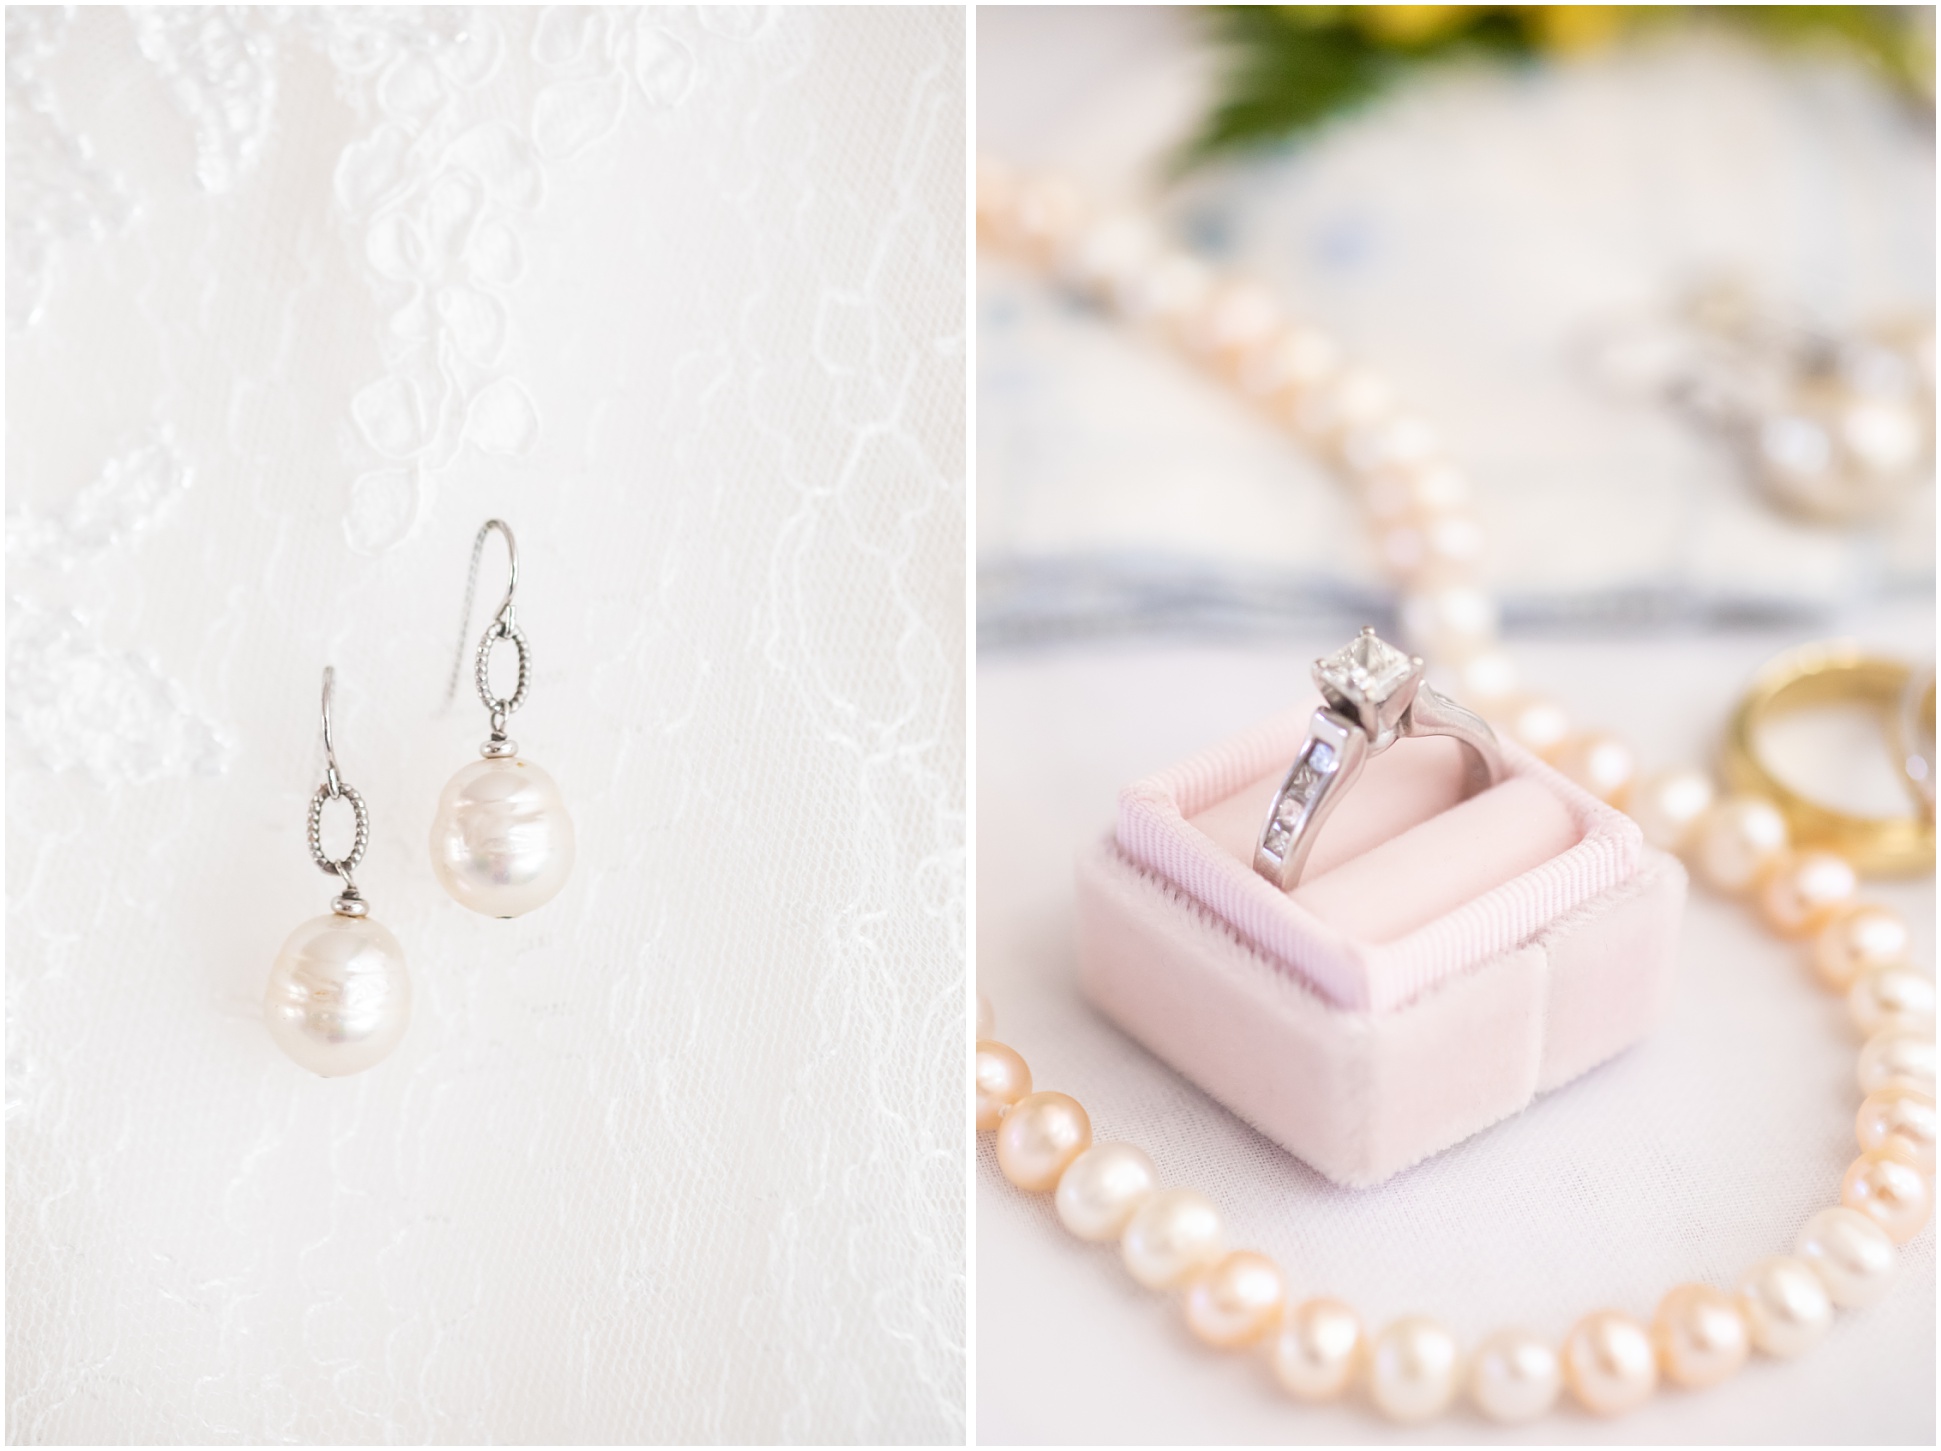 Left Image: Pearl earrings hanging from dress, Right Image: Engagement ring in pink velvet box, with pearls